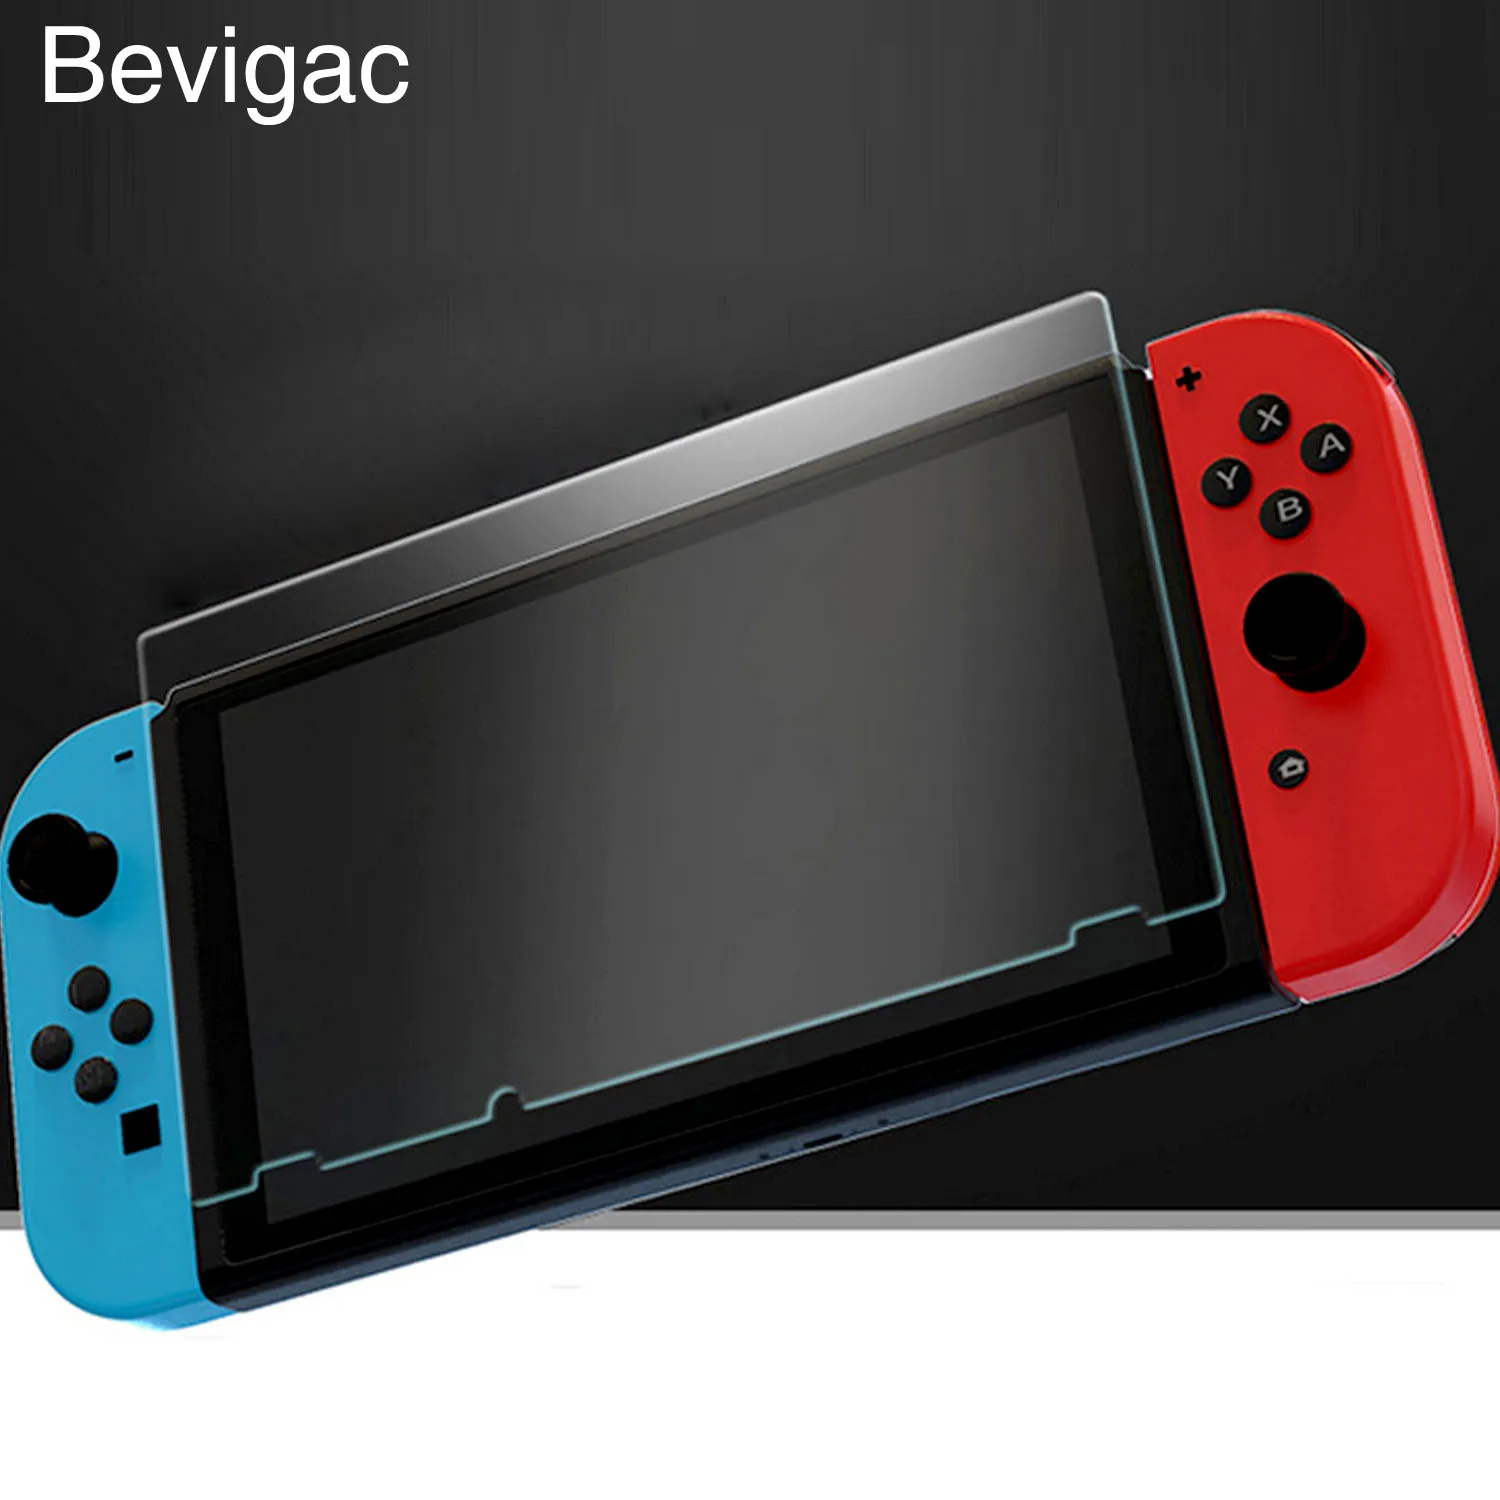 

Bevigac 2pcs 0.3mm Thin Anti-Scratch High Definition Tempered Glass Screen Protector Film Cover for Nintendo Nintend Switch